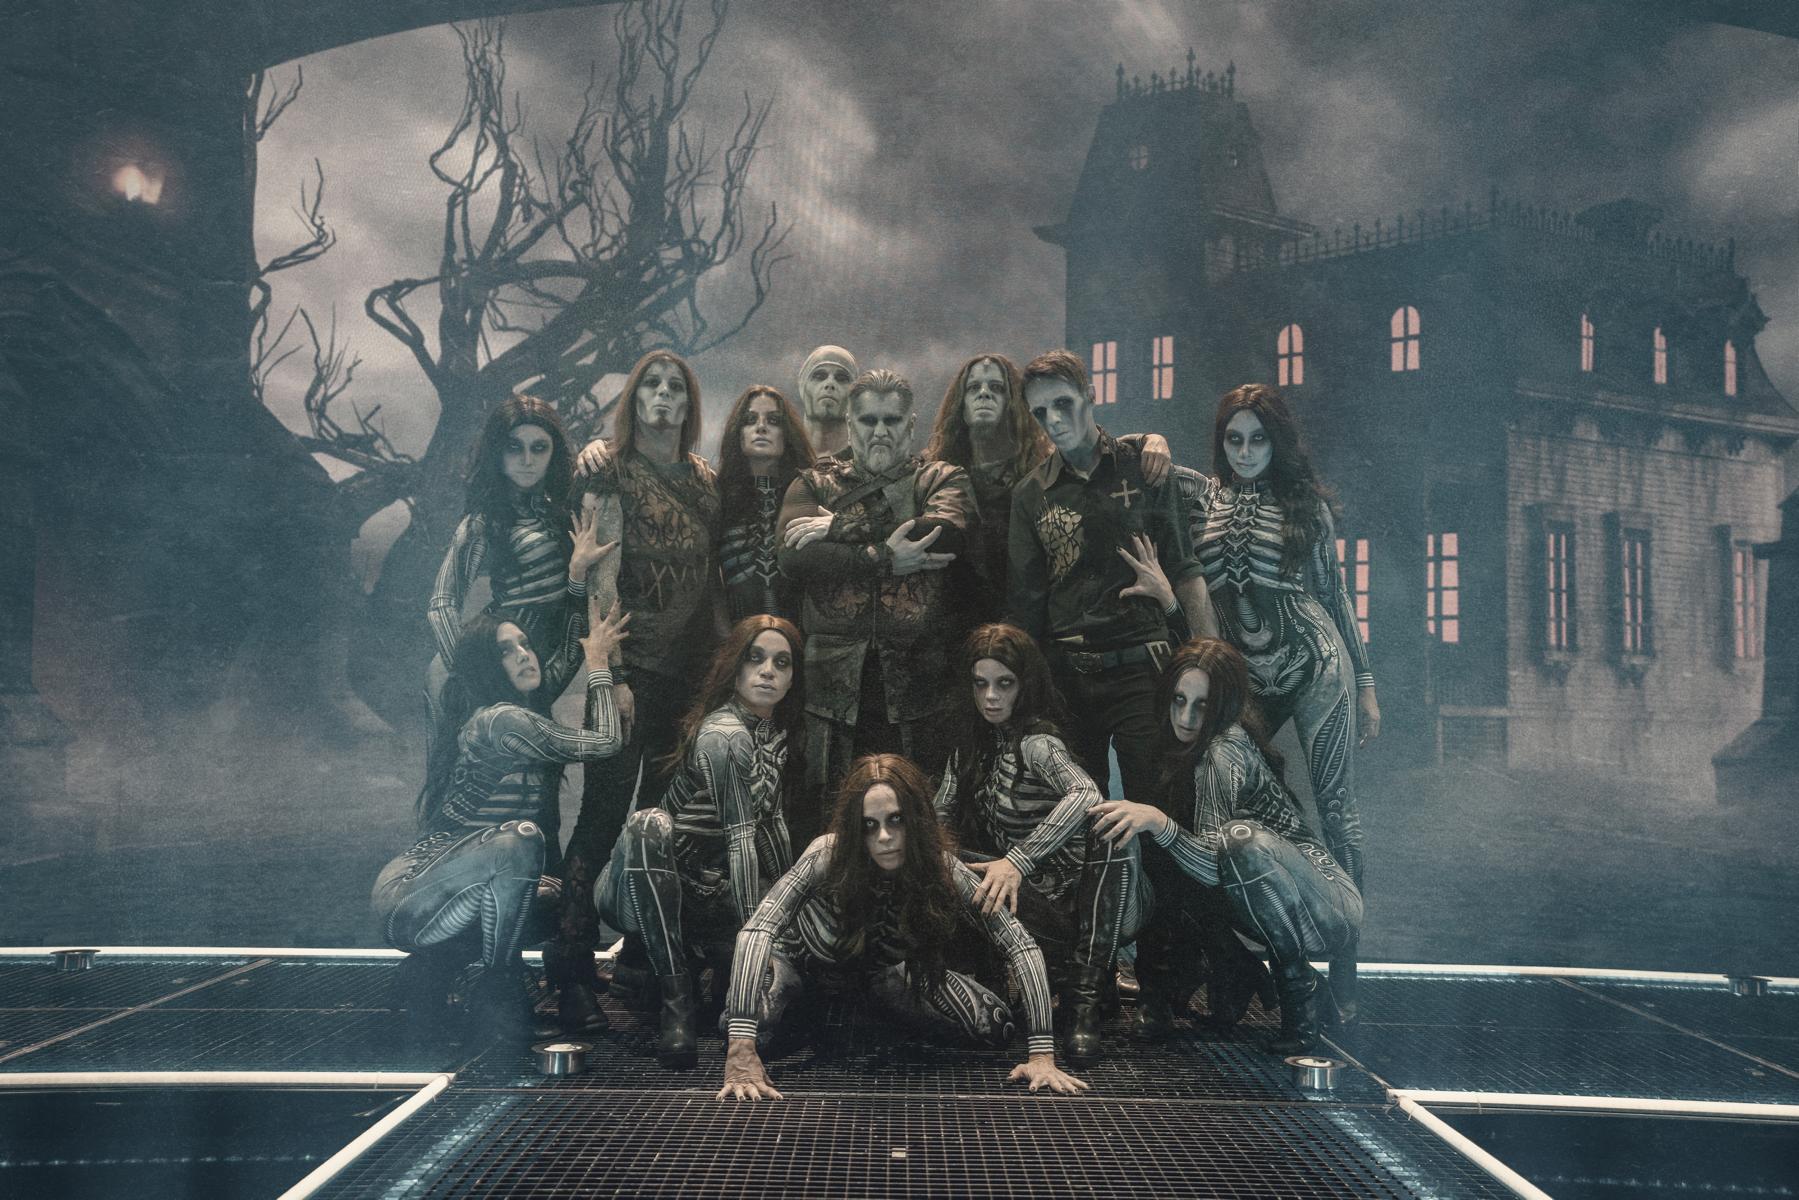 POWERWOLF Release New Single “No Prayer At Midnight” + Official